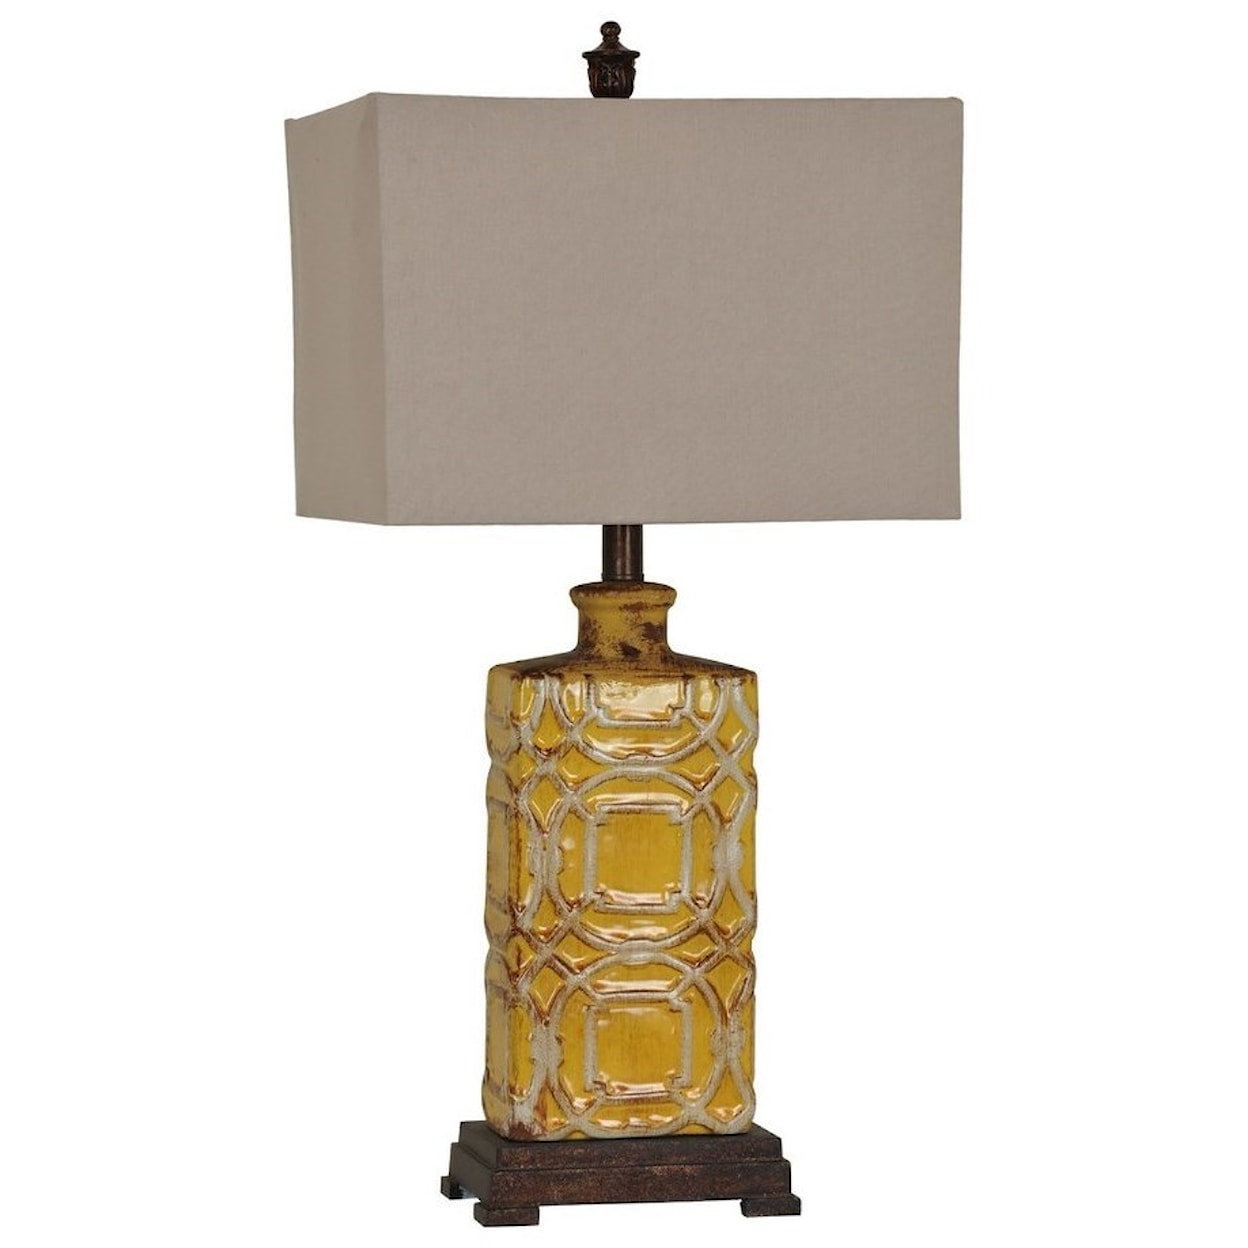 Crestview Collection Lighting Chatham Table Lamp